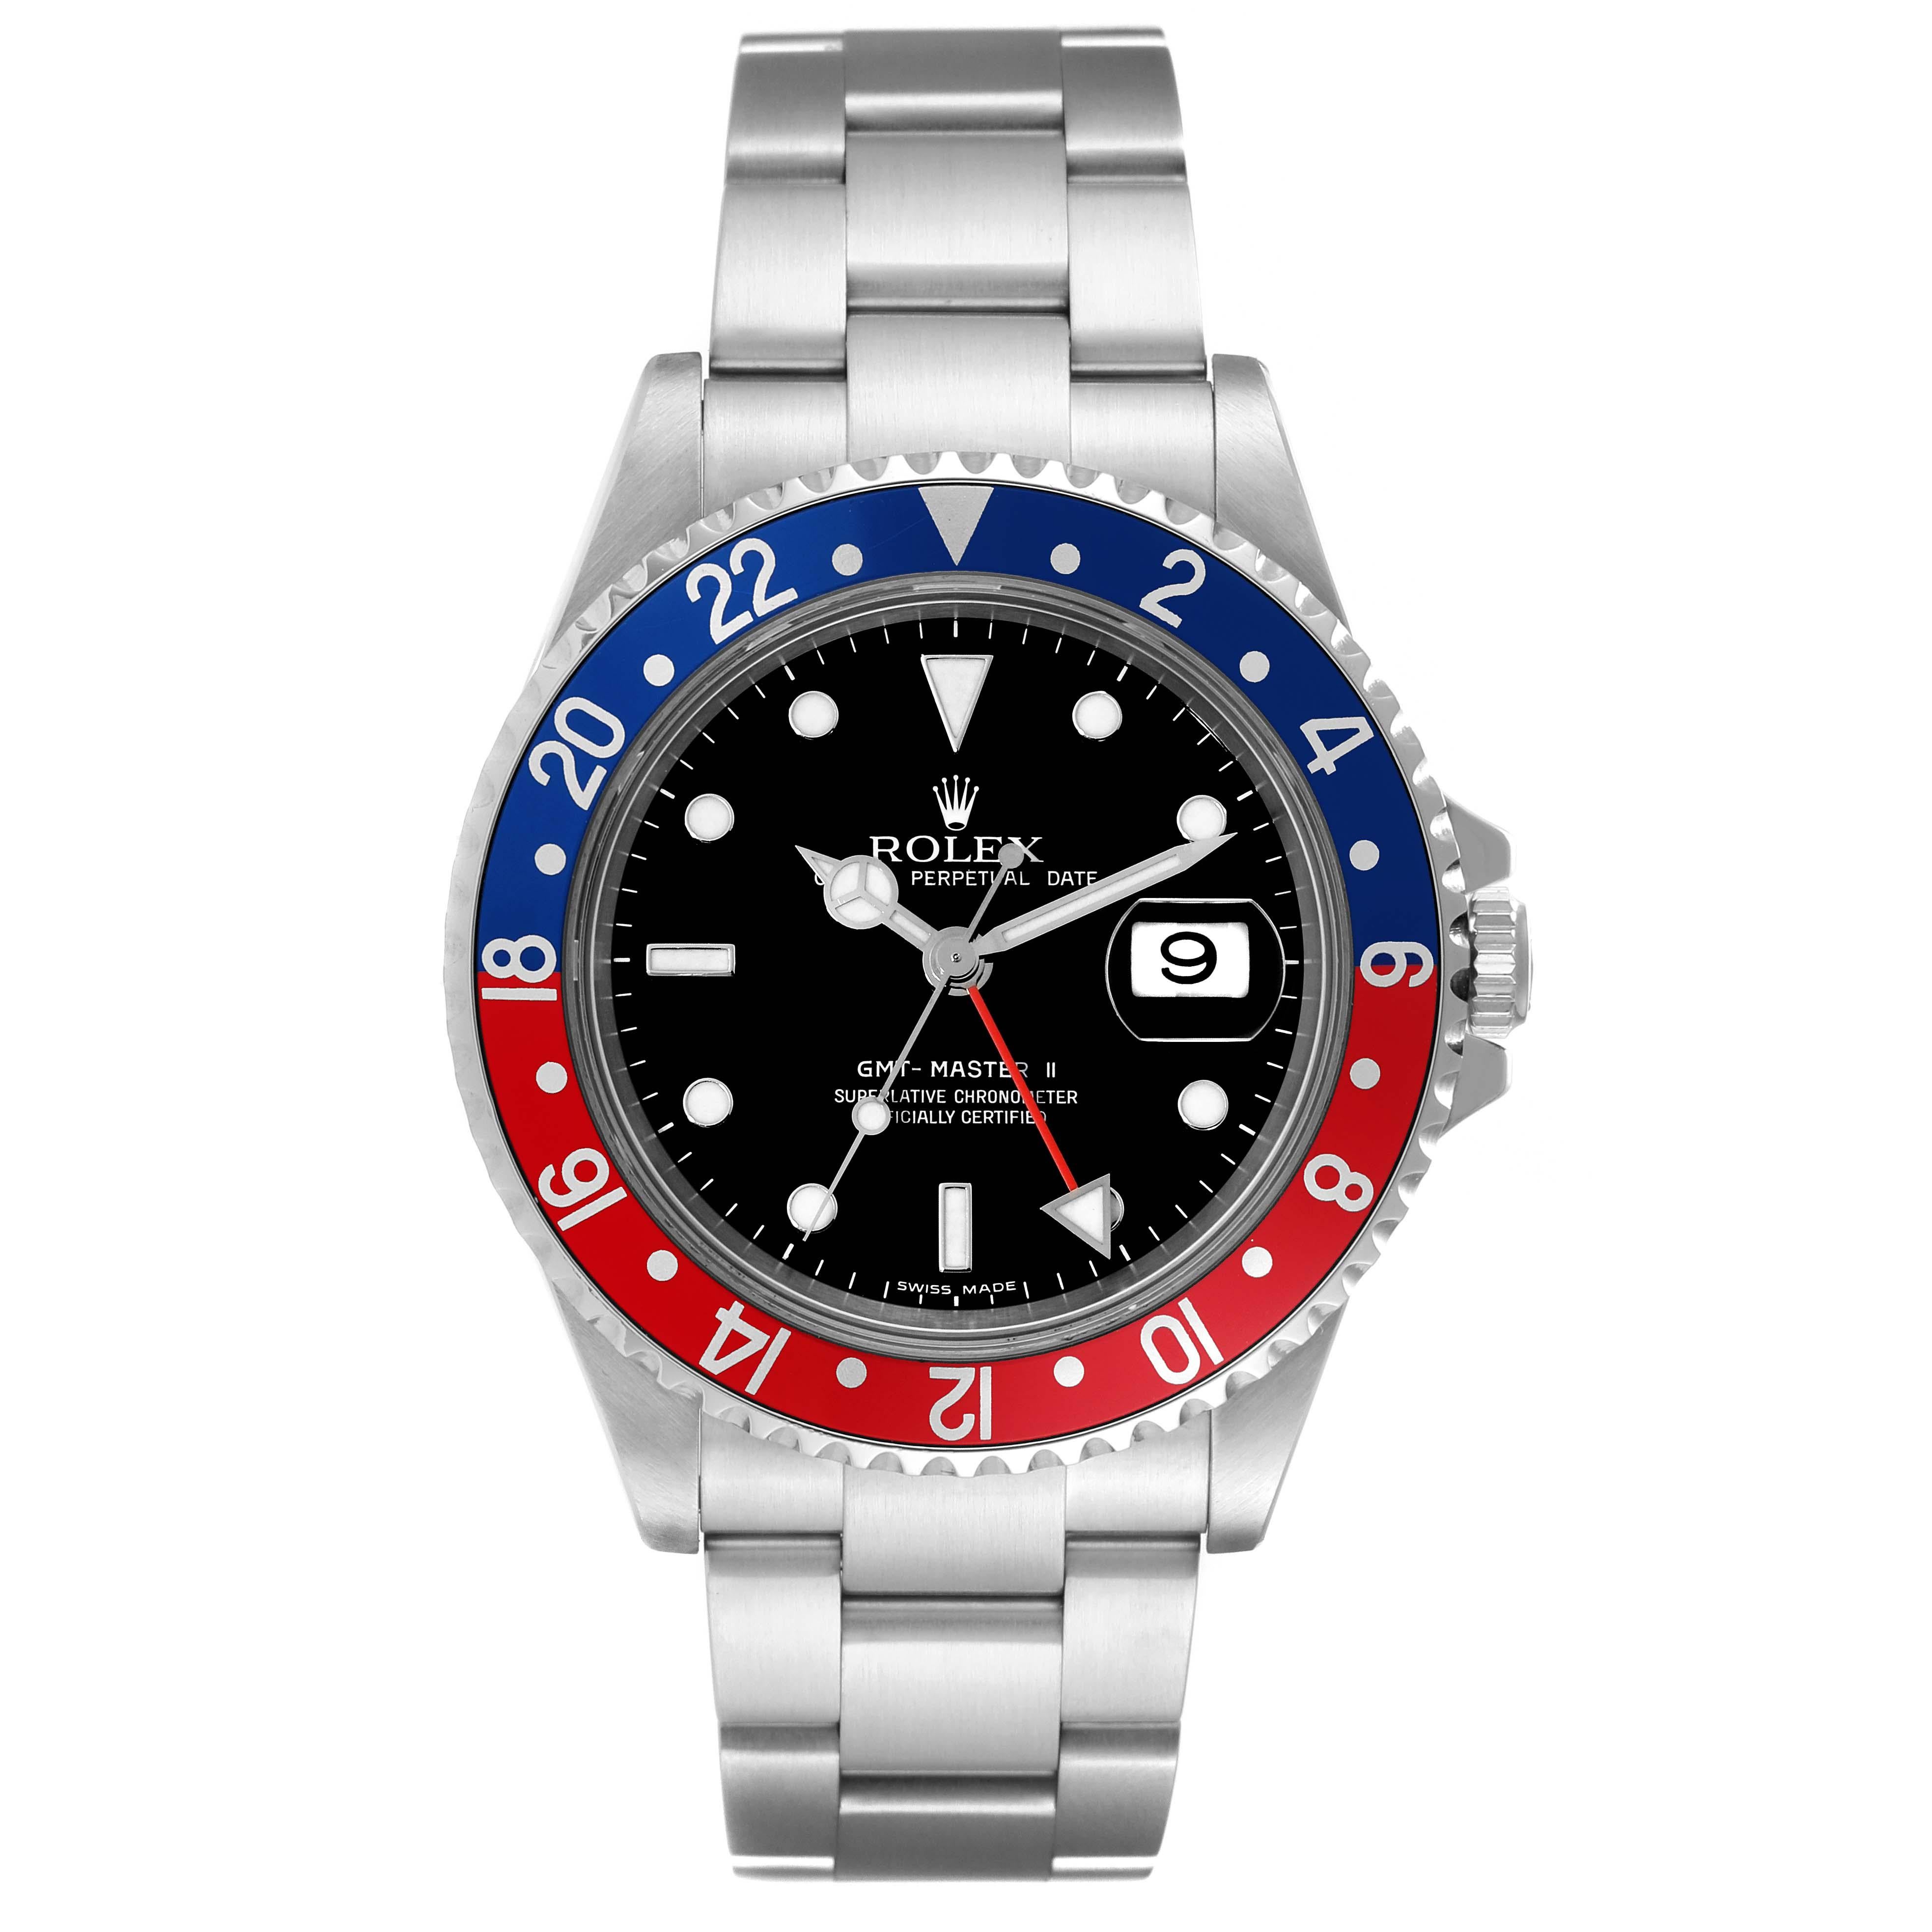 Rolex GMT Master II Blue Red Pepsi Error Dial Steel Mens Watch 16710 Box Papers. Officially certified chronometer automatic self-winding movement. Stainless steel case 40.0 mm in diameter. Rolex logo on the crown. Bidirectional rotating GMT bezel